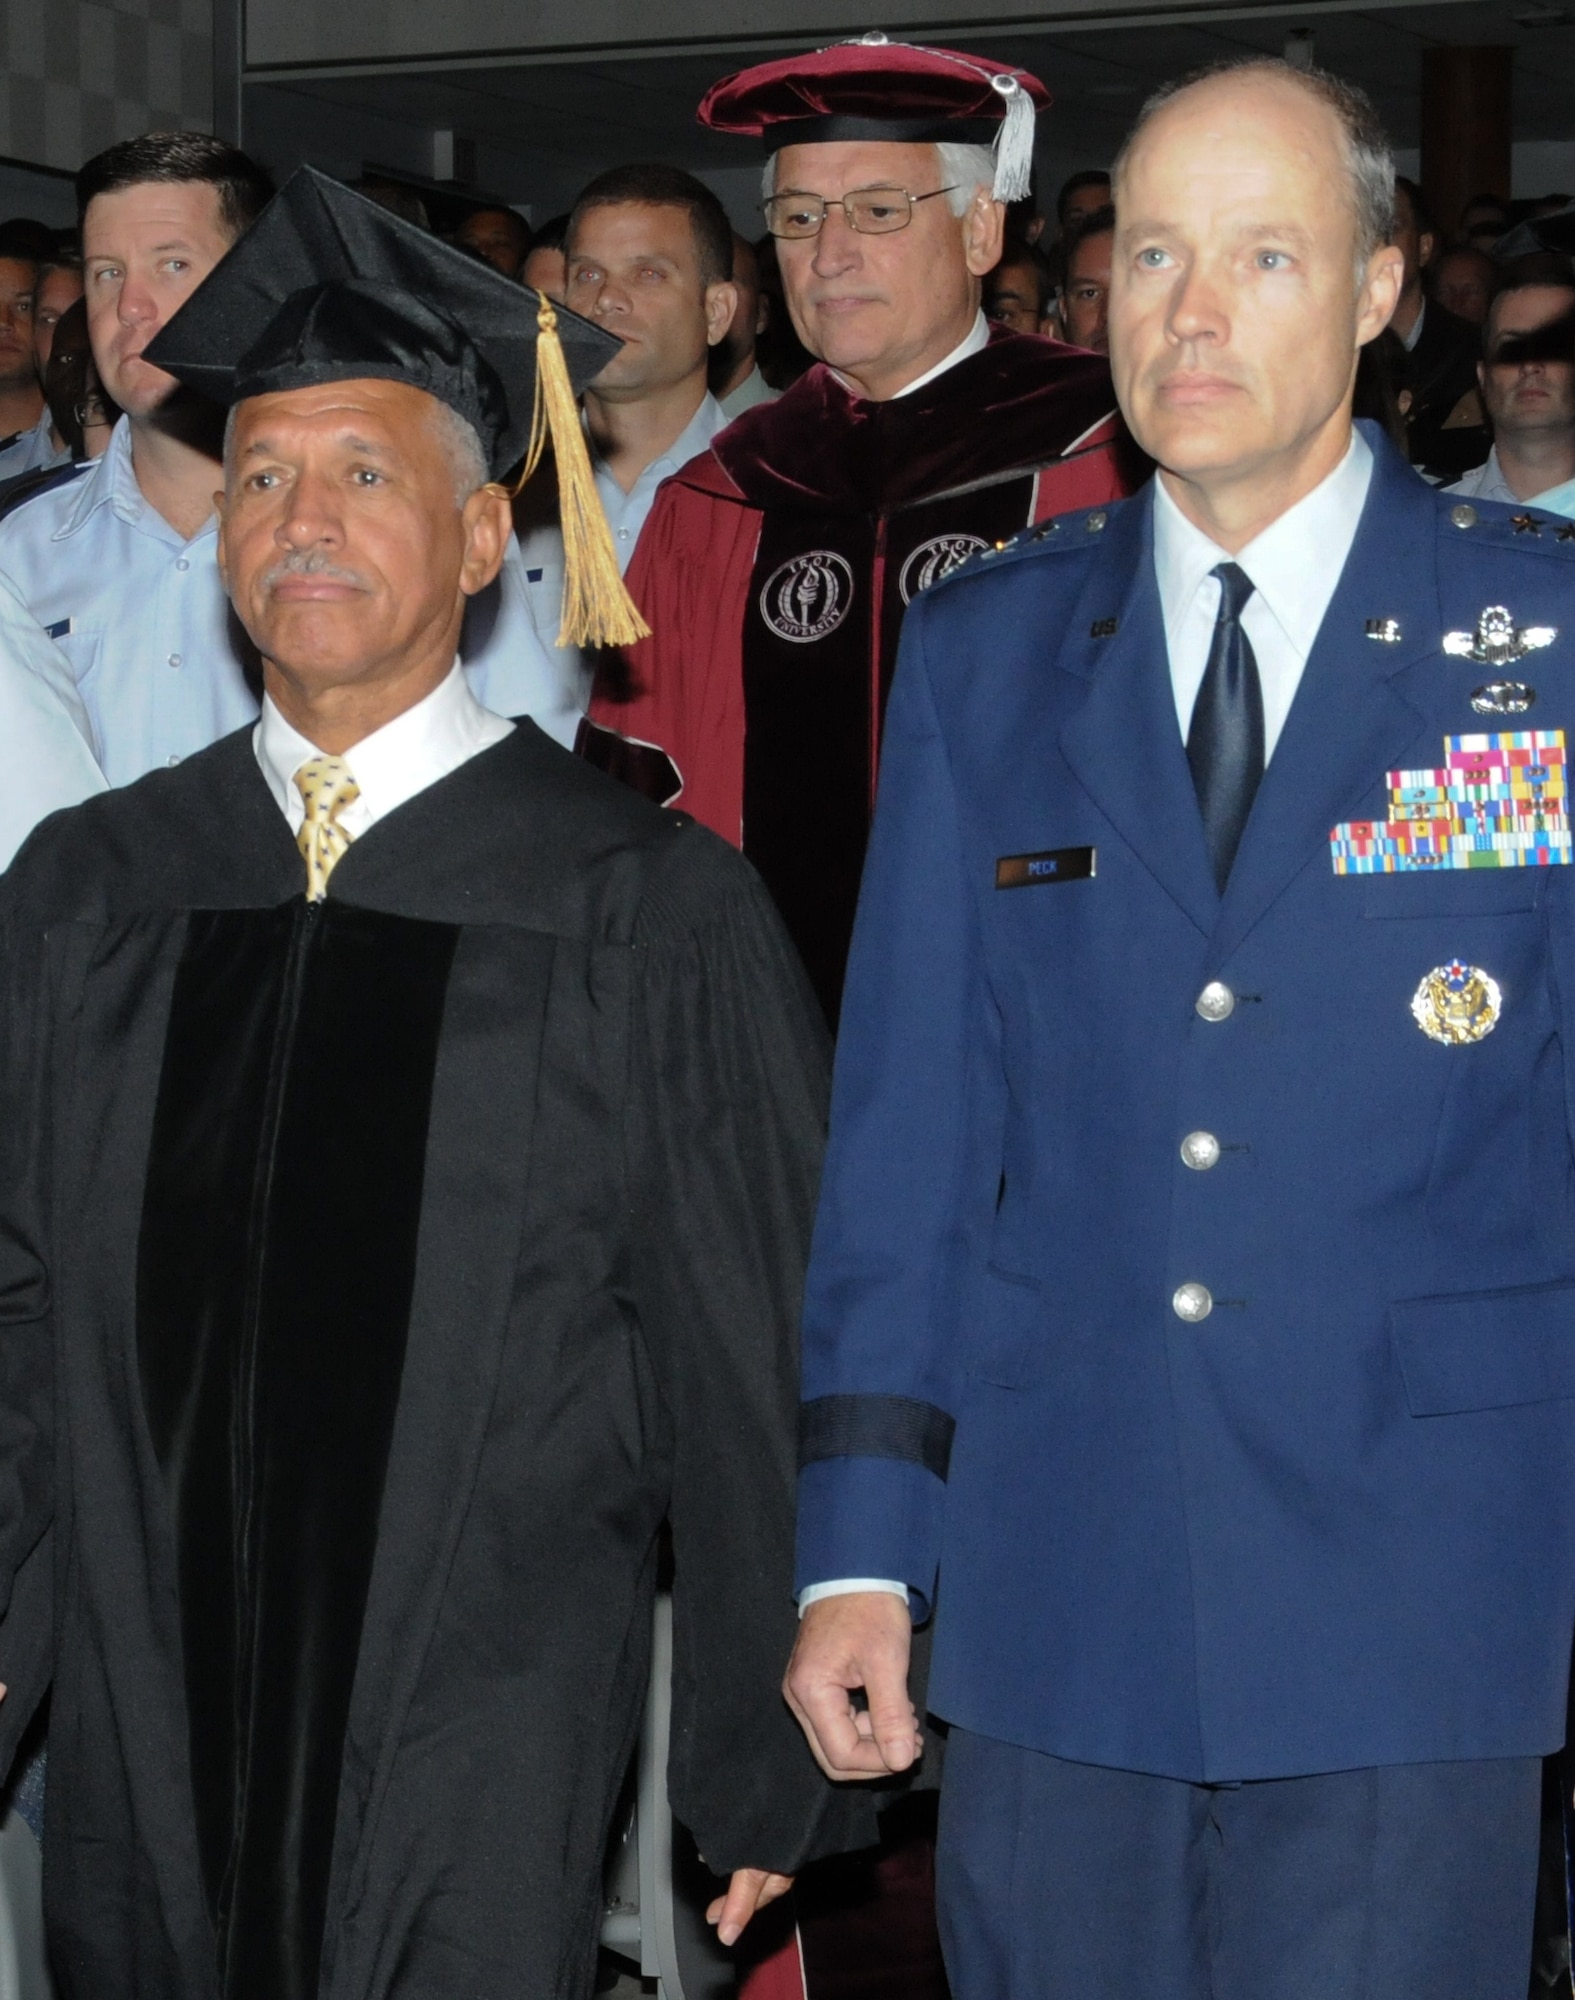 Ceremonial Presenataion of the Doctor of Science, Honoris Causa to the Honorable Charles F. Bolden, Jr. Administrator to National Aeronautics and Space Center  (NASA) at Polifka Auditorium, 15 November 2010 Maxwell AFB
